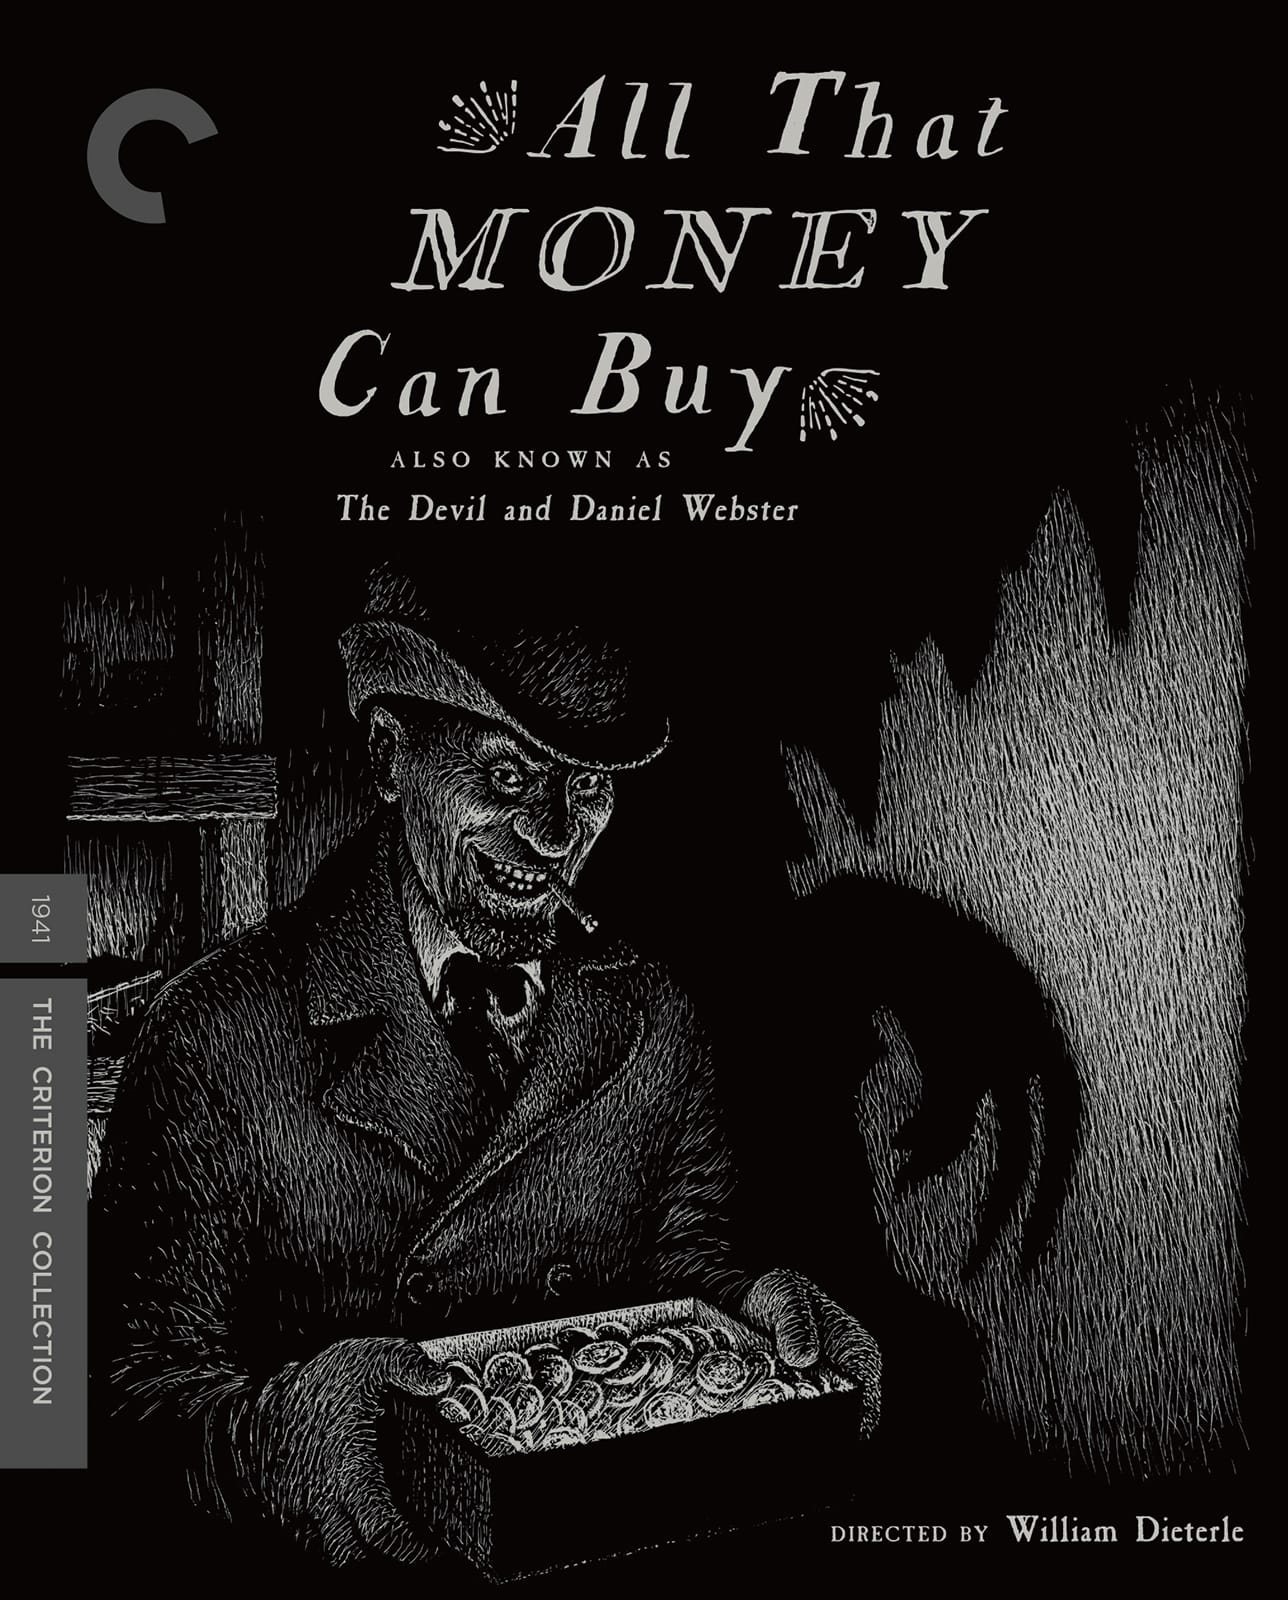 All That Money Can Buy (a.k.a. The Devil and Daniel Webster) Blu-ray (Criterion Collection)